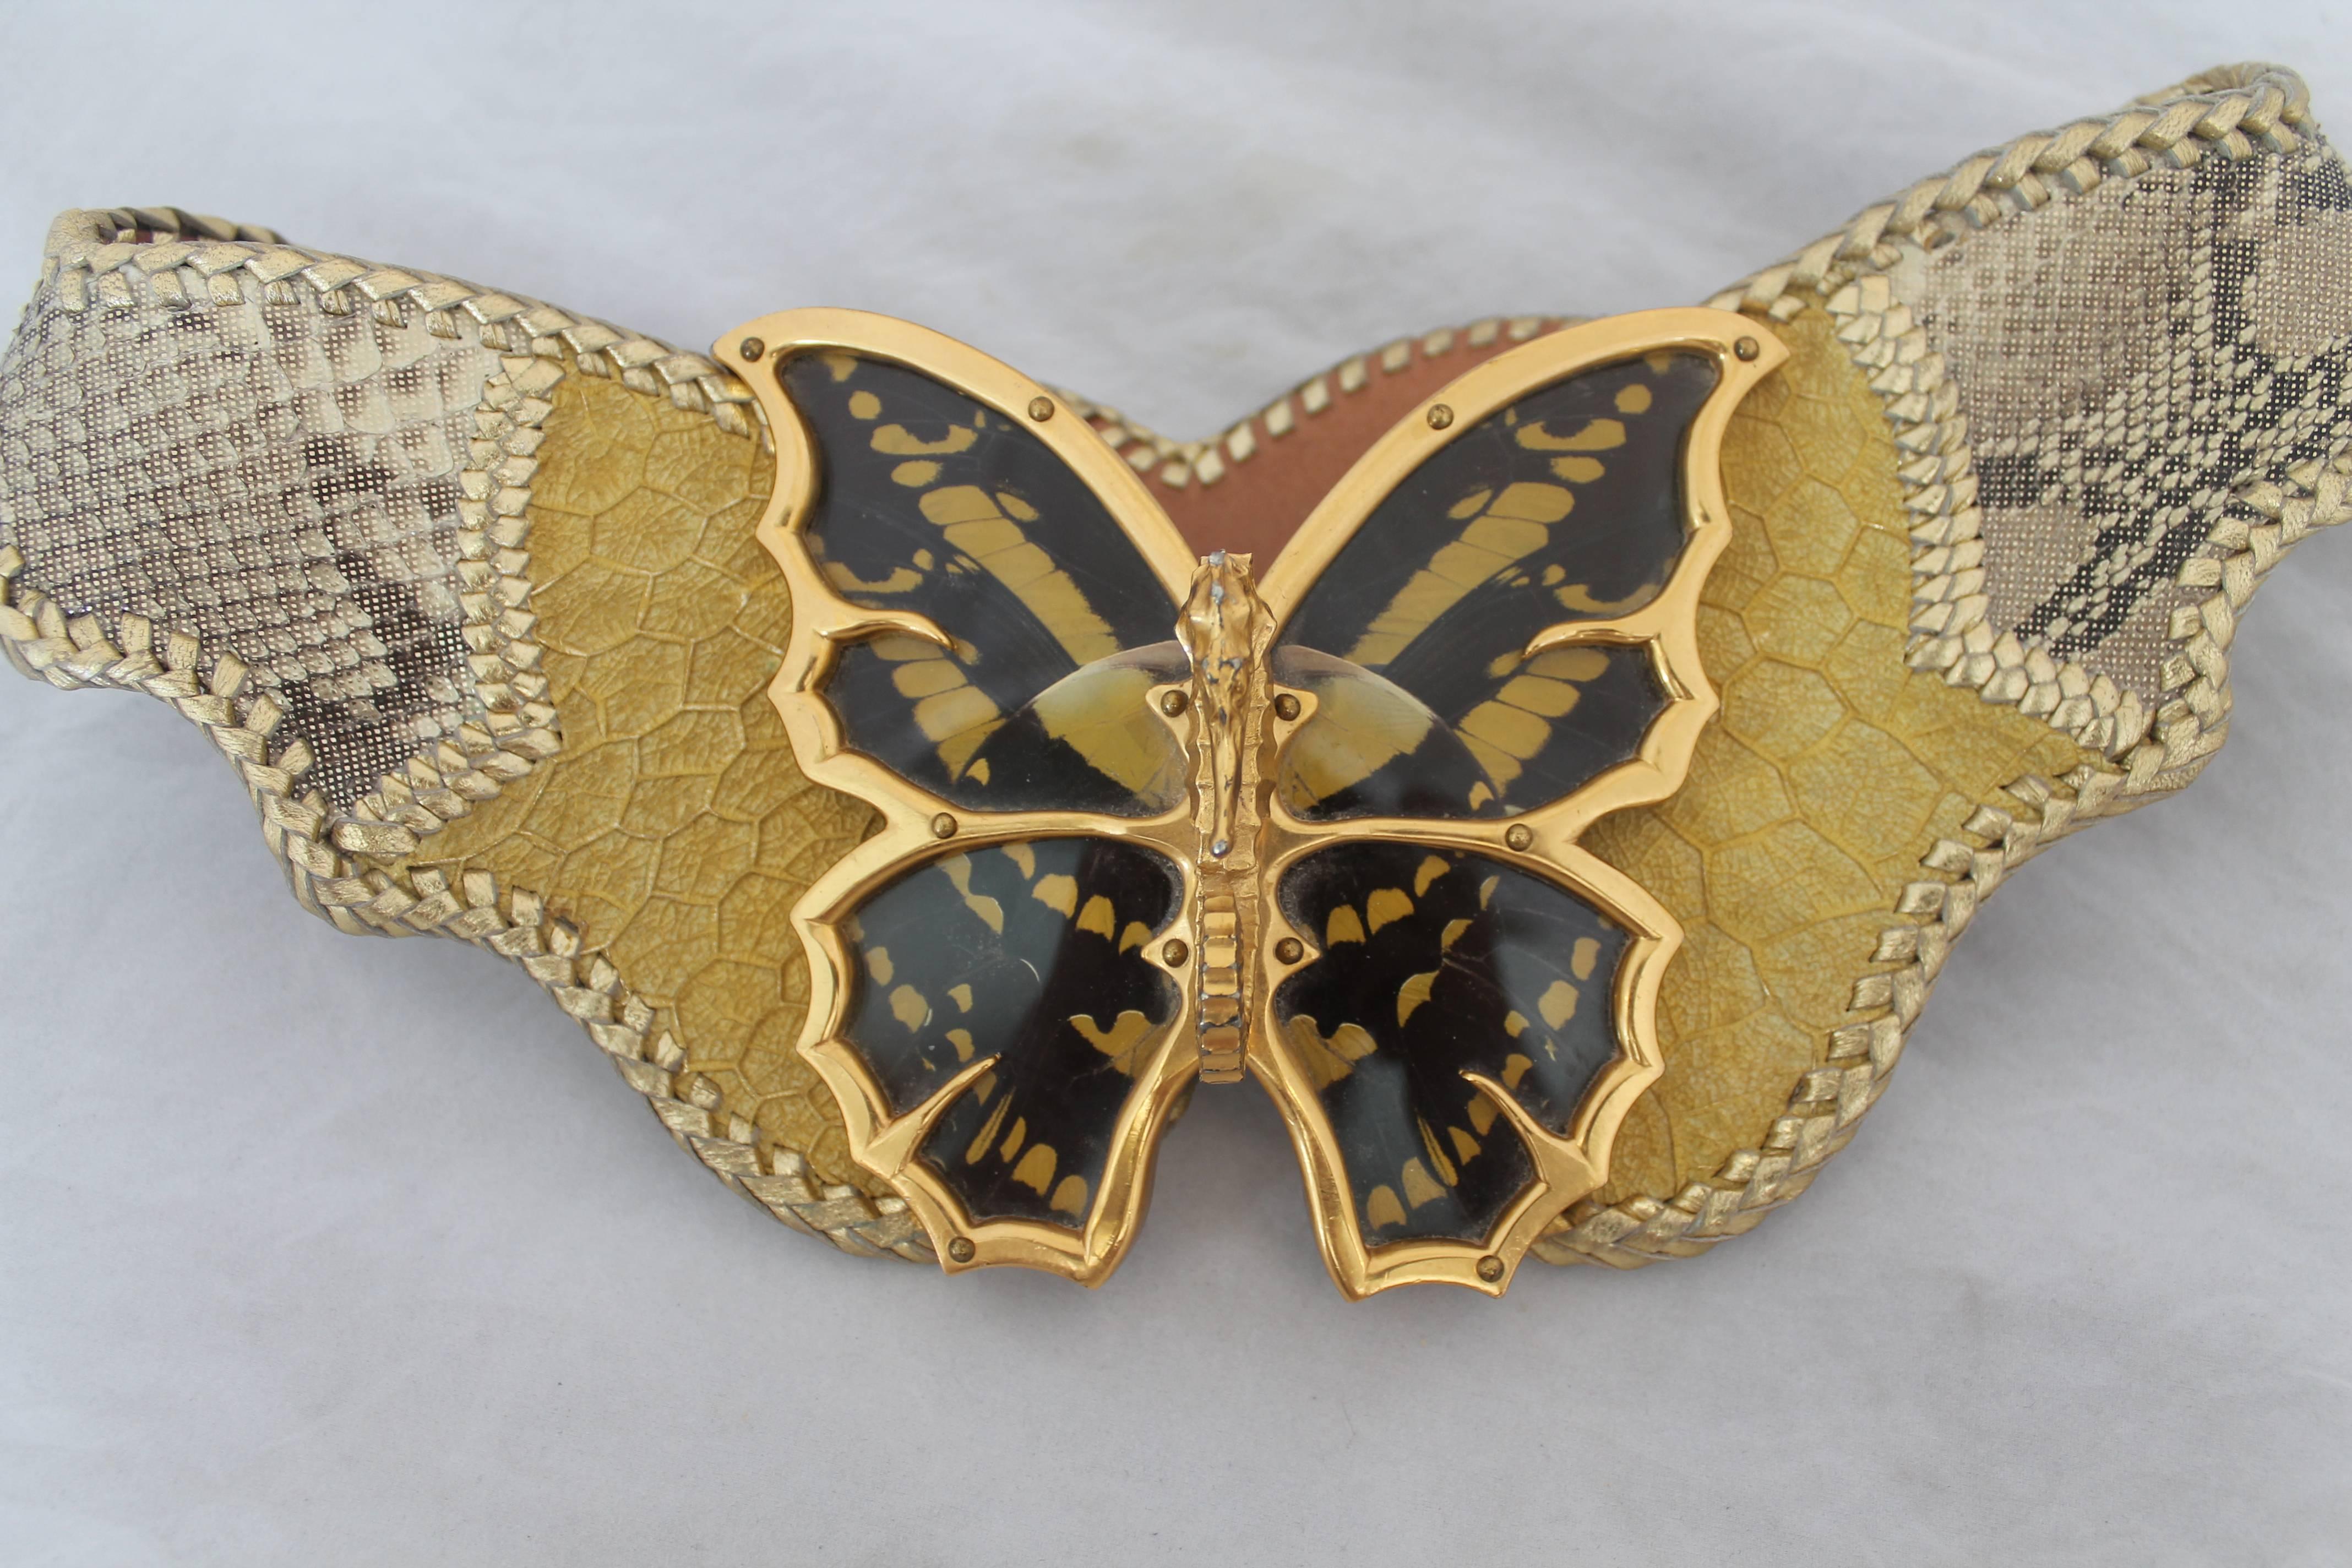 Cesar Ugarte Vintage Gold Python Belt with Brass Butterfly Buckle - cc 1980's. This belt is in excellent condition and is a limited edition piece. It is handmade and is reversible with a matte tan leather inside. The butterfly has a seahorse in the